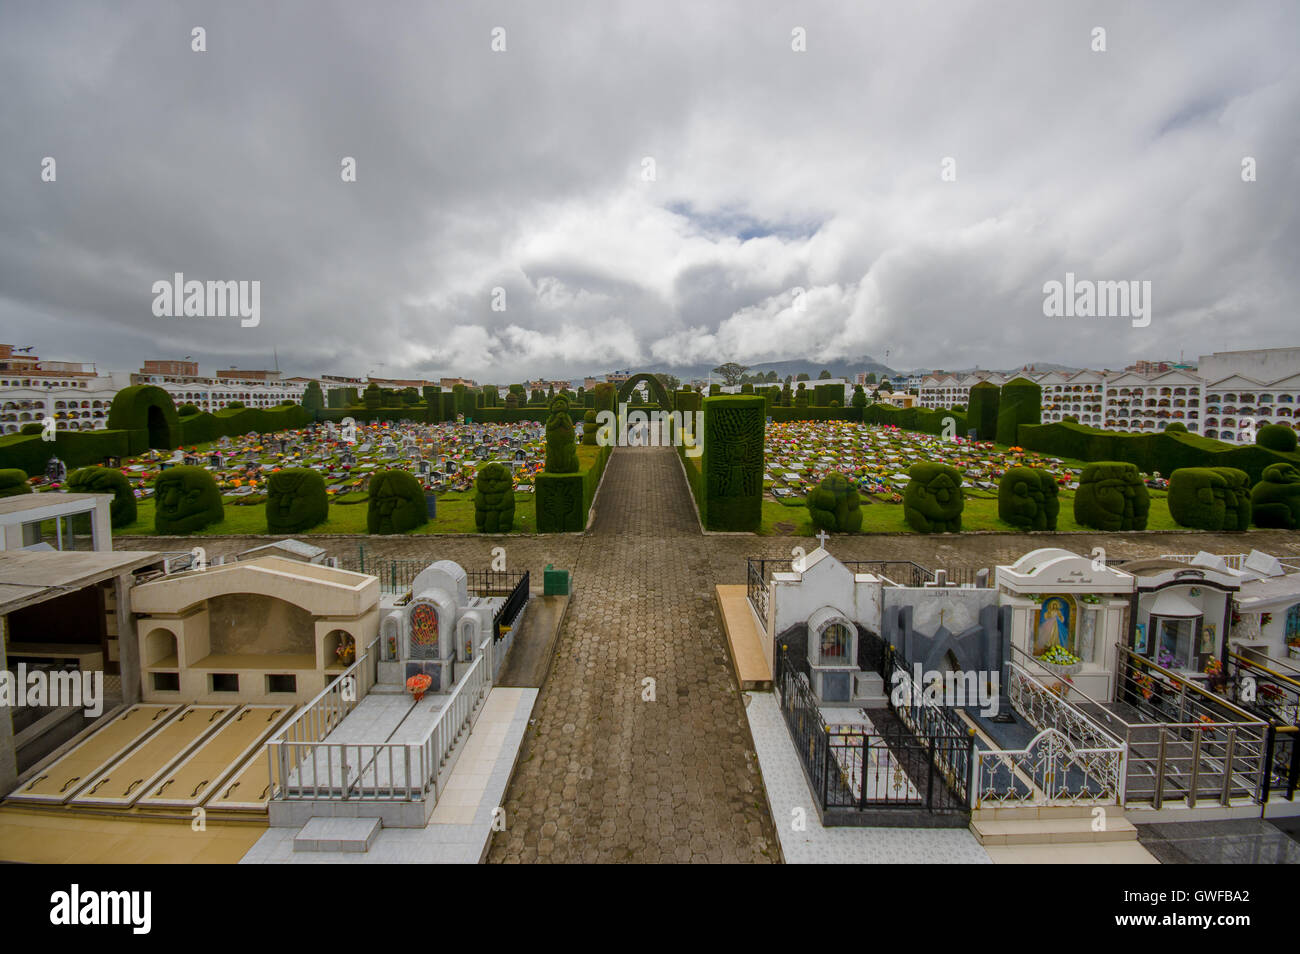 TULCAN, ECUADOR - JULY 3, 2016: nice overview of the gardens of the cemetery, nice plants sculptures surrounding graves Stock Photo